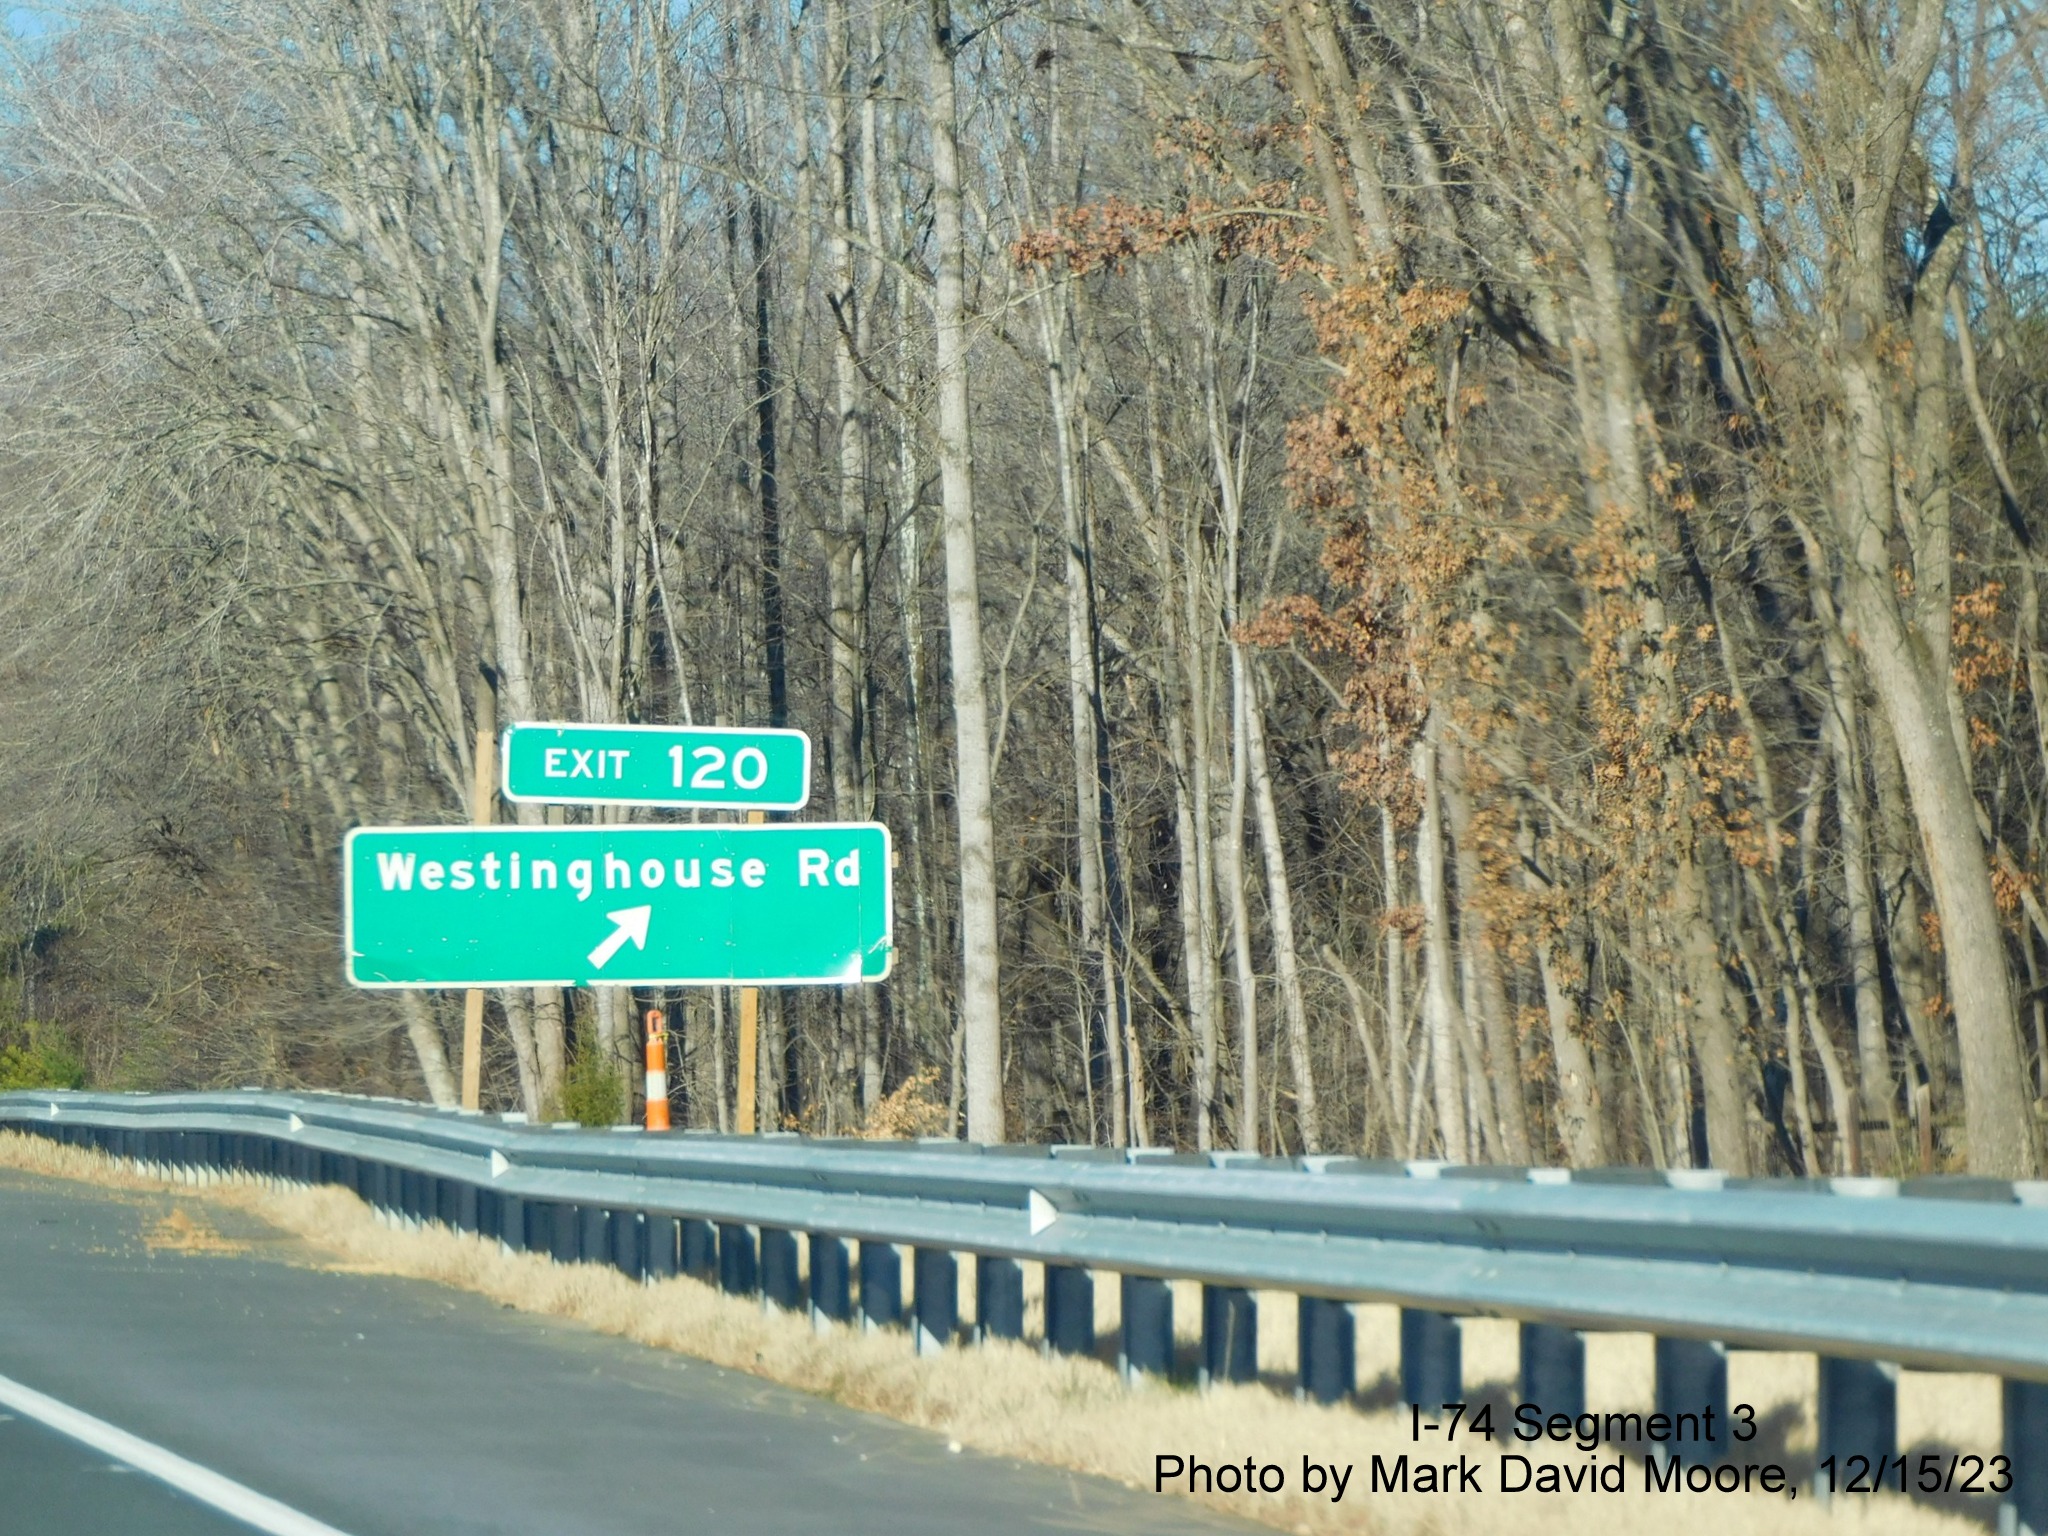 Image of newly placed 1 mile advance sign for the Westinghouse Road exit along the widened 
       portion of US 52 North (Future I-74 West) beyond the Winston-Salem Northern Beltway interchange, by Mark David Moore, December 2023